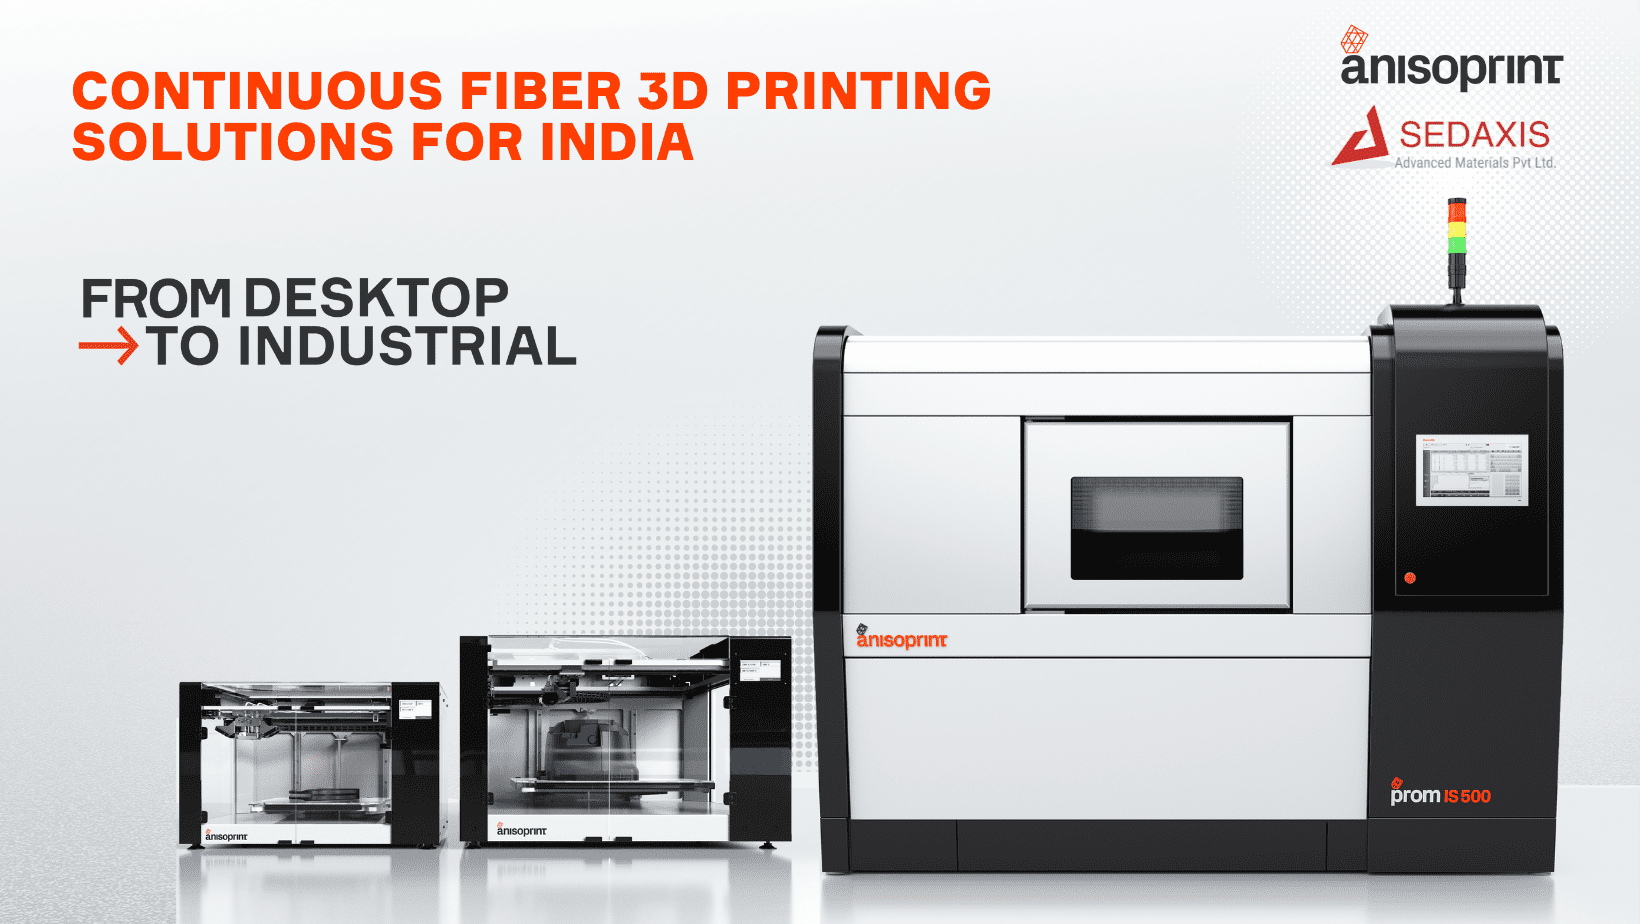 Anisoprint and Sedaxis announce an exclusive partnership to grow carbon fiber 3D printing in India